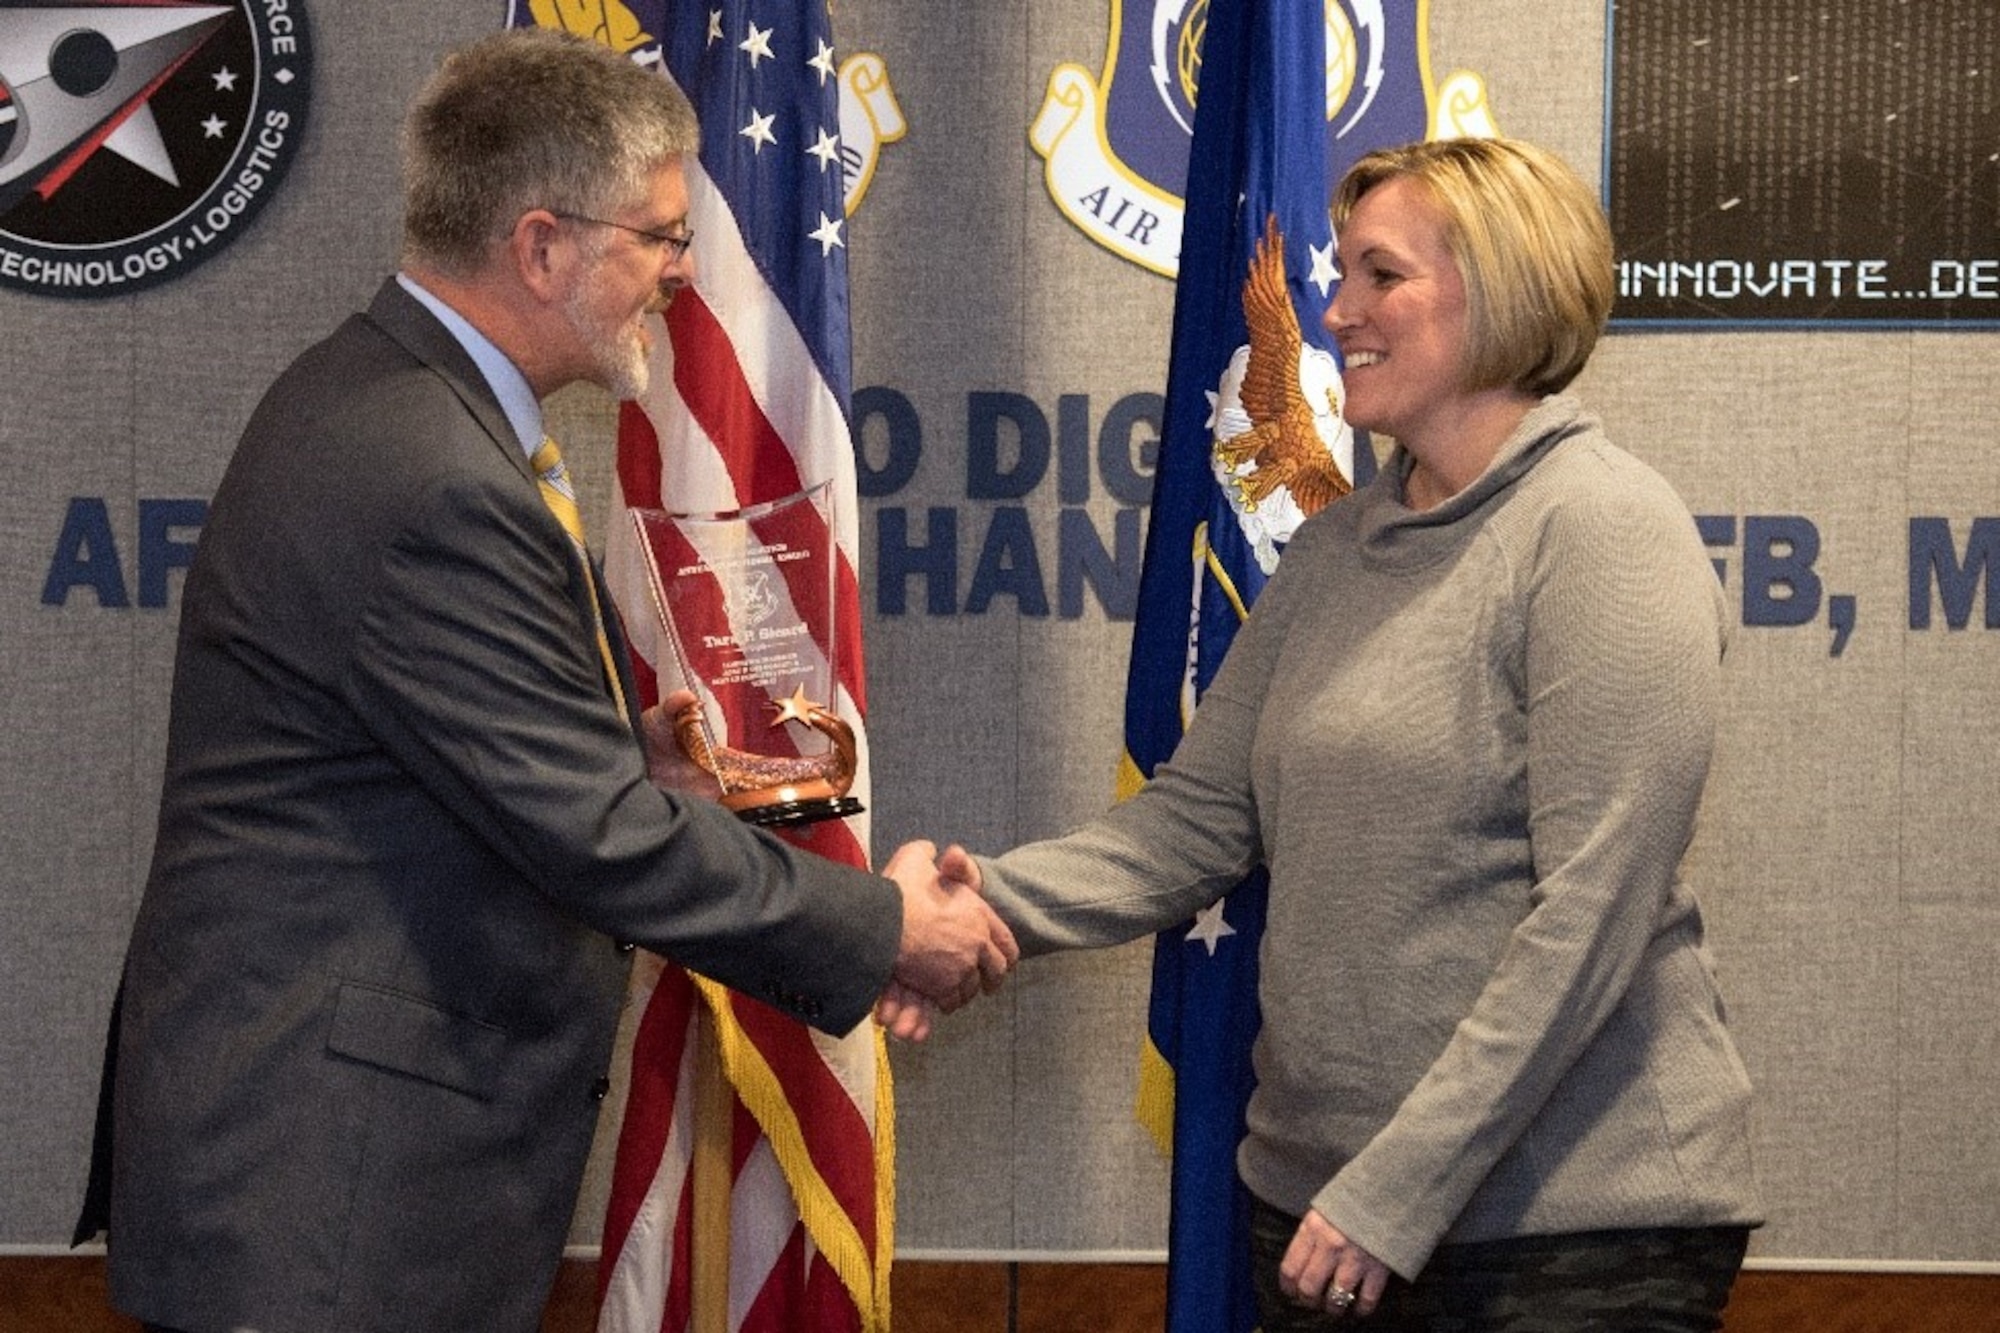 Scott Owens, deputy director of Command, Control, Communications, Intelligence and Networks Directorate, presents Tara Sicard, Base Infrastructure Branch chief, the Logistics Manager for ACAT I and II (non-flying) Tier II Award during an awards ceremony held at Wright-Patterson Air Force Base in Ohio and viewed by VTC at Hanscom Air Force Base, Mass., Feb.27. (U.S. Air Force photo by Jerry Saslav)